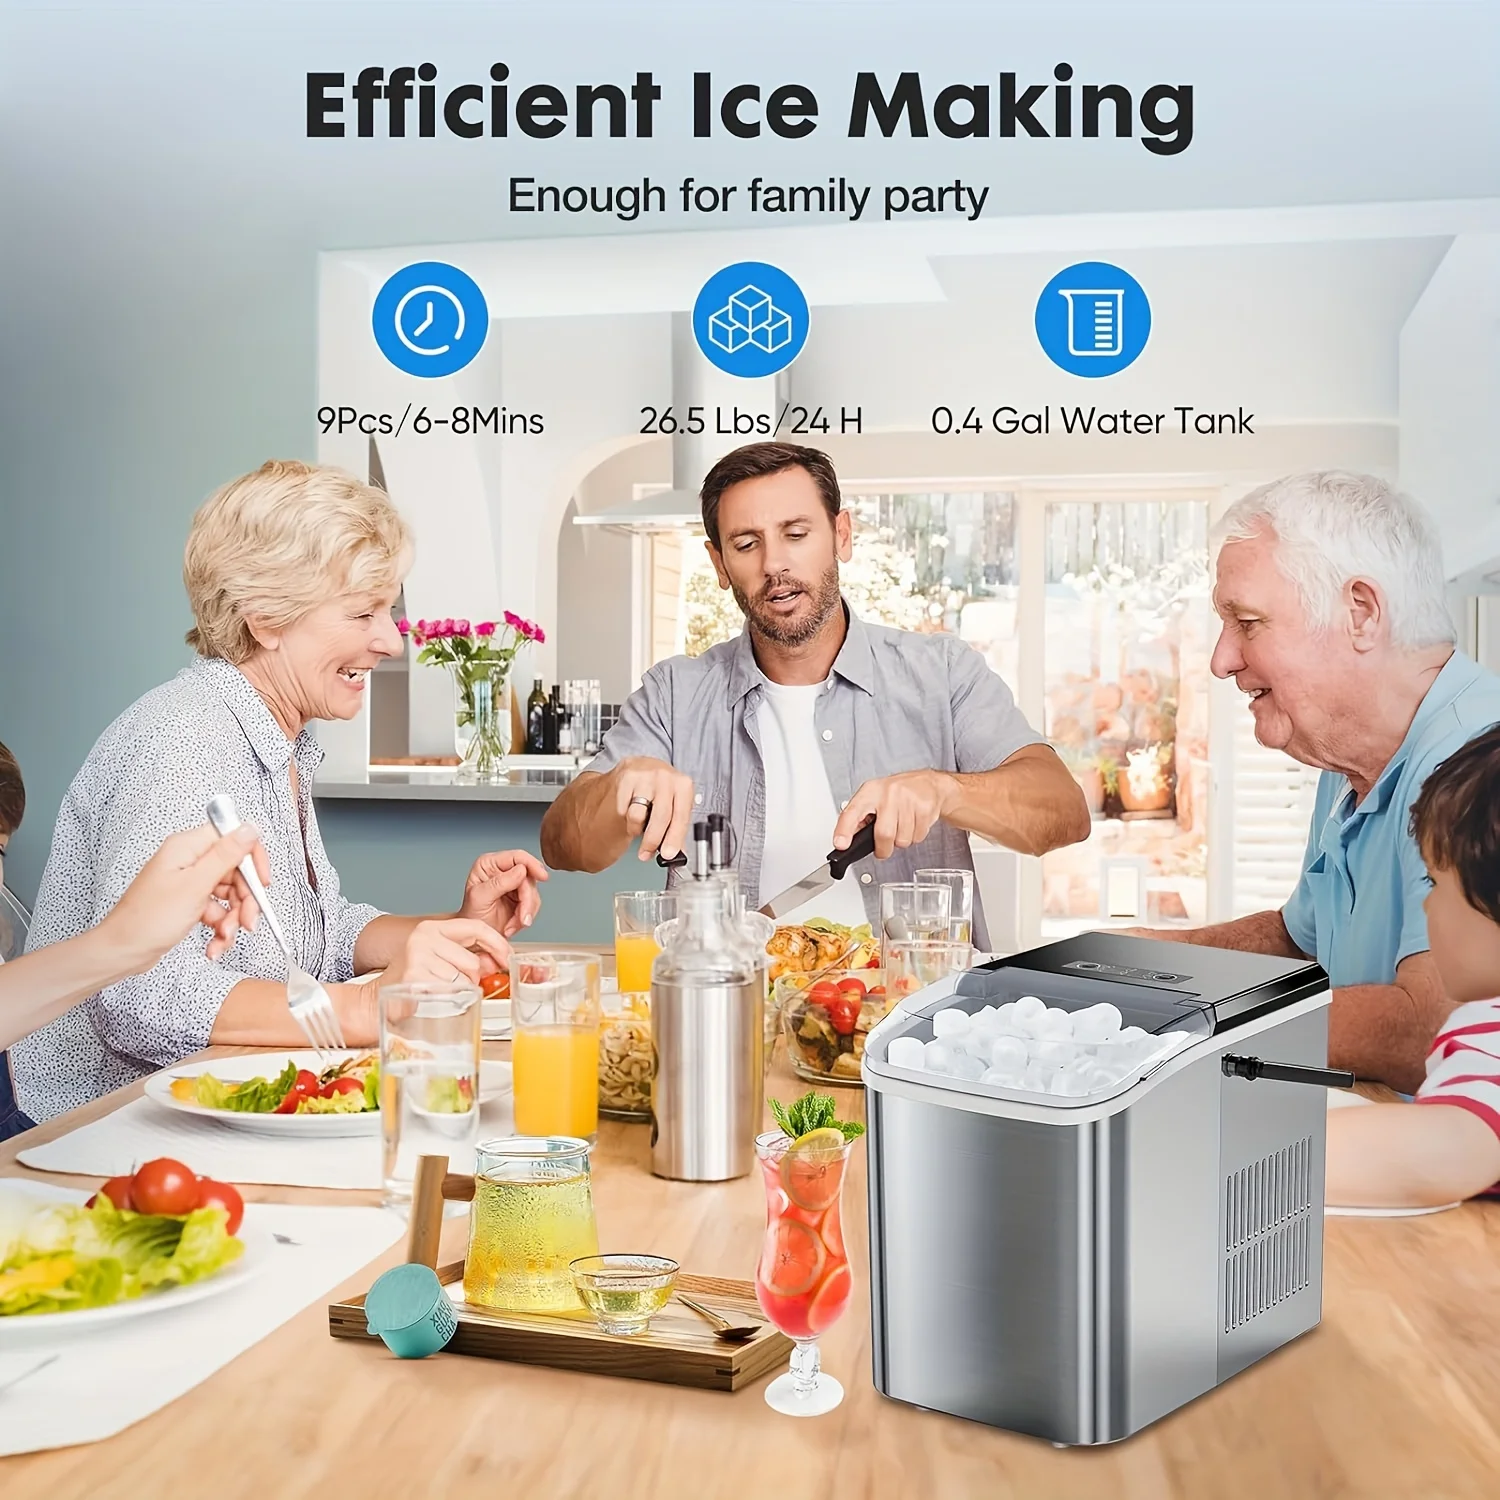 

Ice Maker For Restaurant Countertop - Creates 9 lceCubes In 6 Mins, Produces 26lbs lce In 24Hrs, Compact PortableSelf-Cleaning